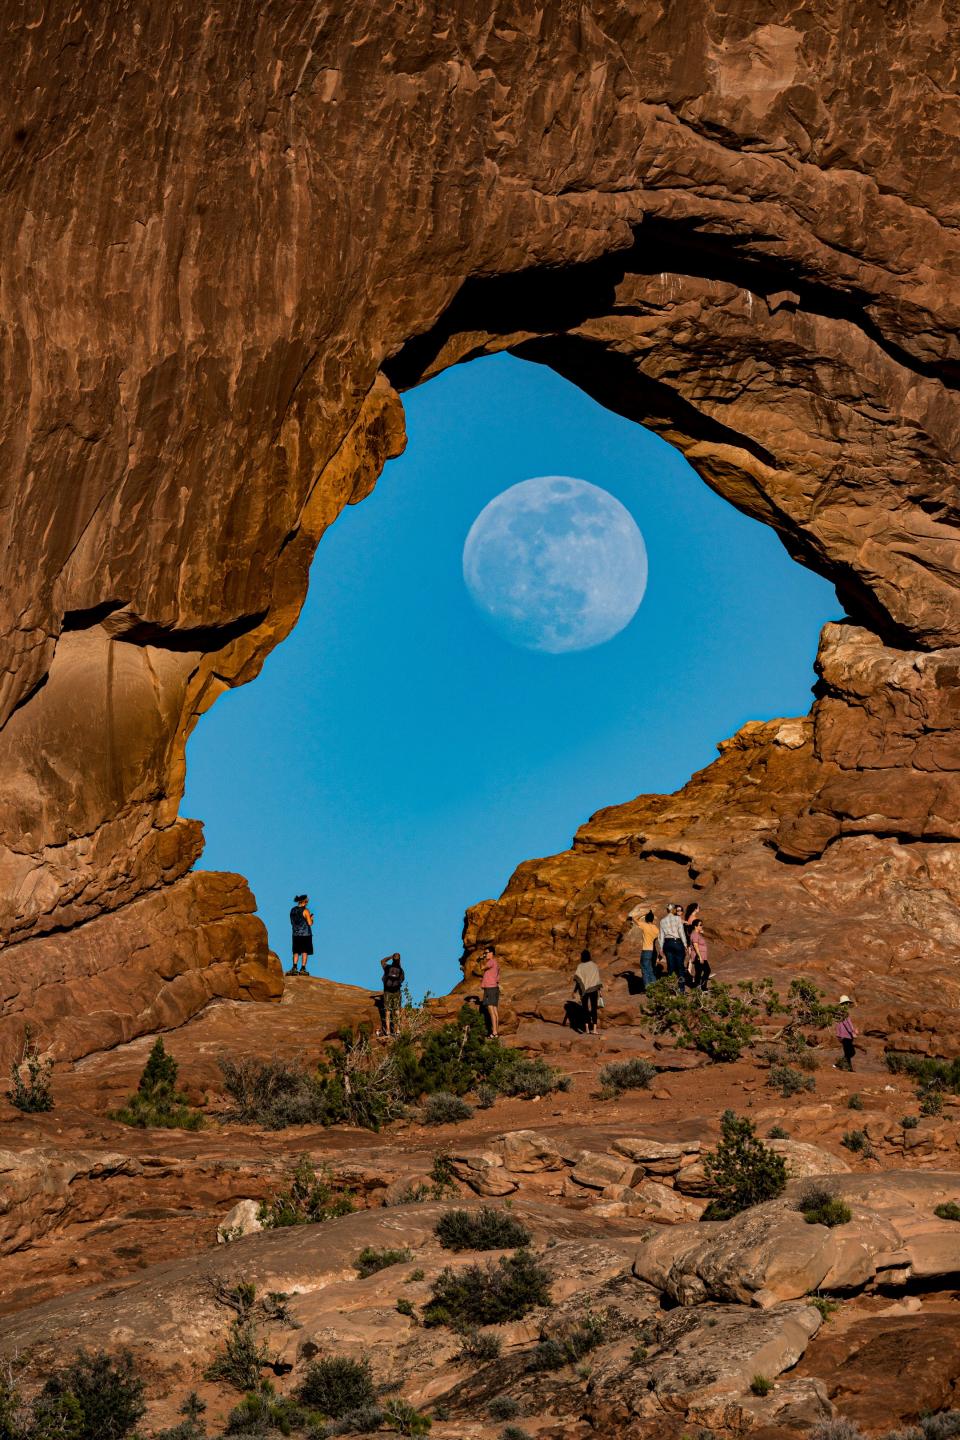 The nearly full Flower Moon rises in the middle of the North Window Arch in Arches National Park in Utah on May 24, 2021.